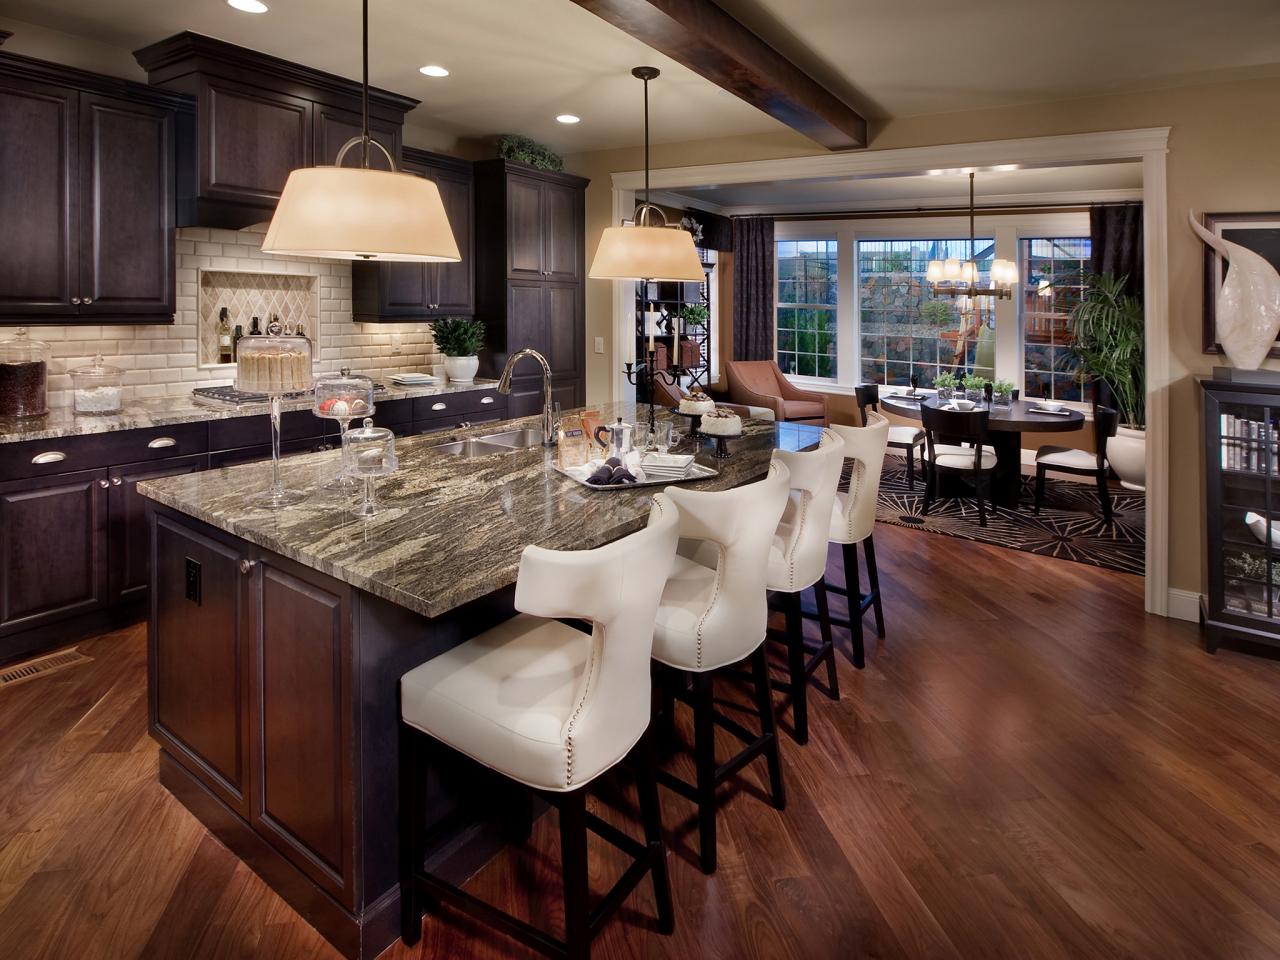 A kitchen with a center island and dark wood cabinets.